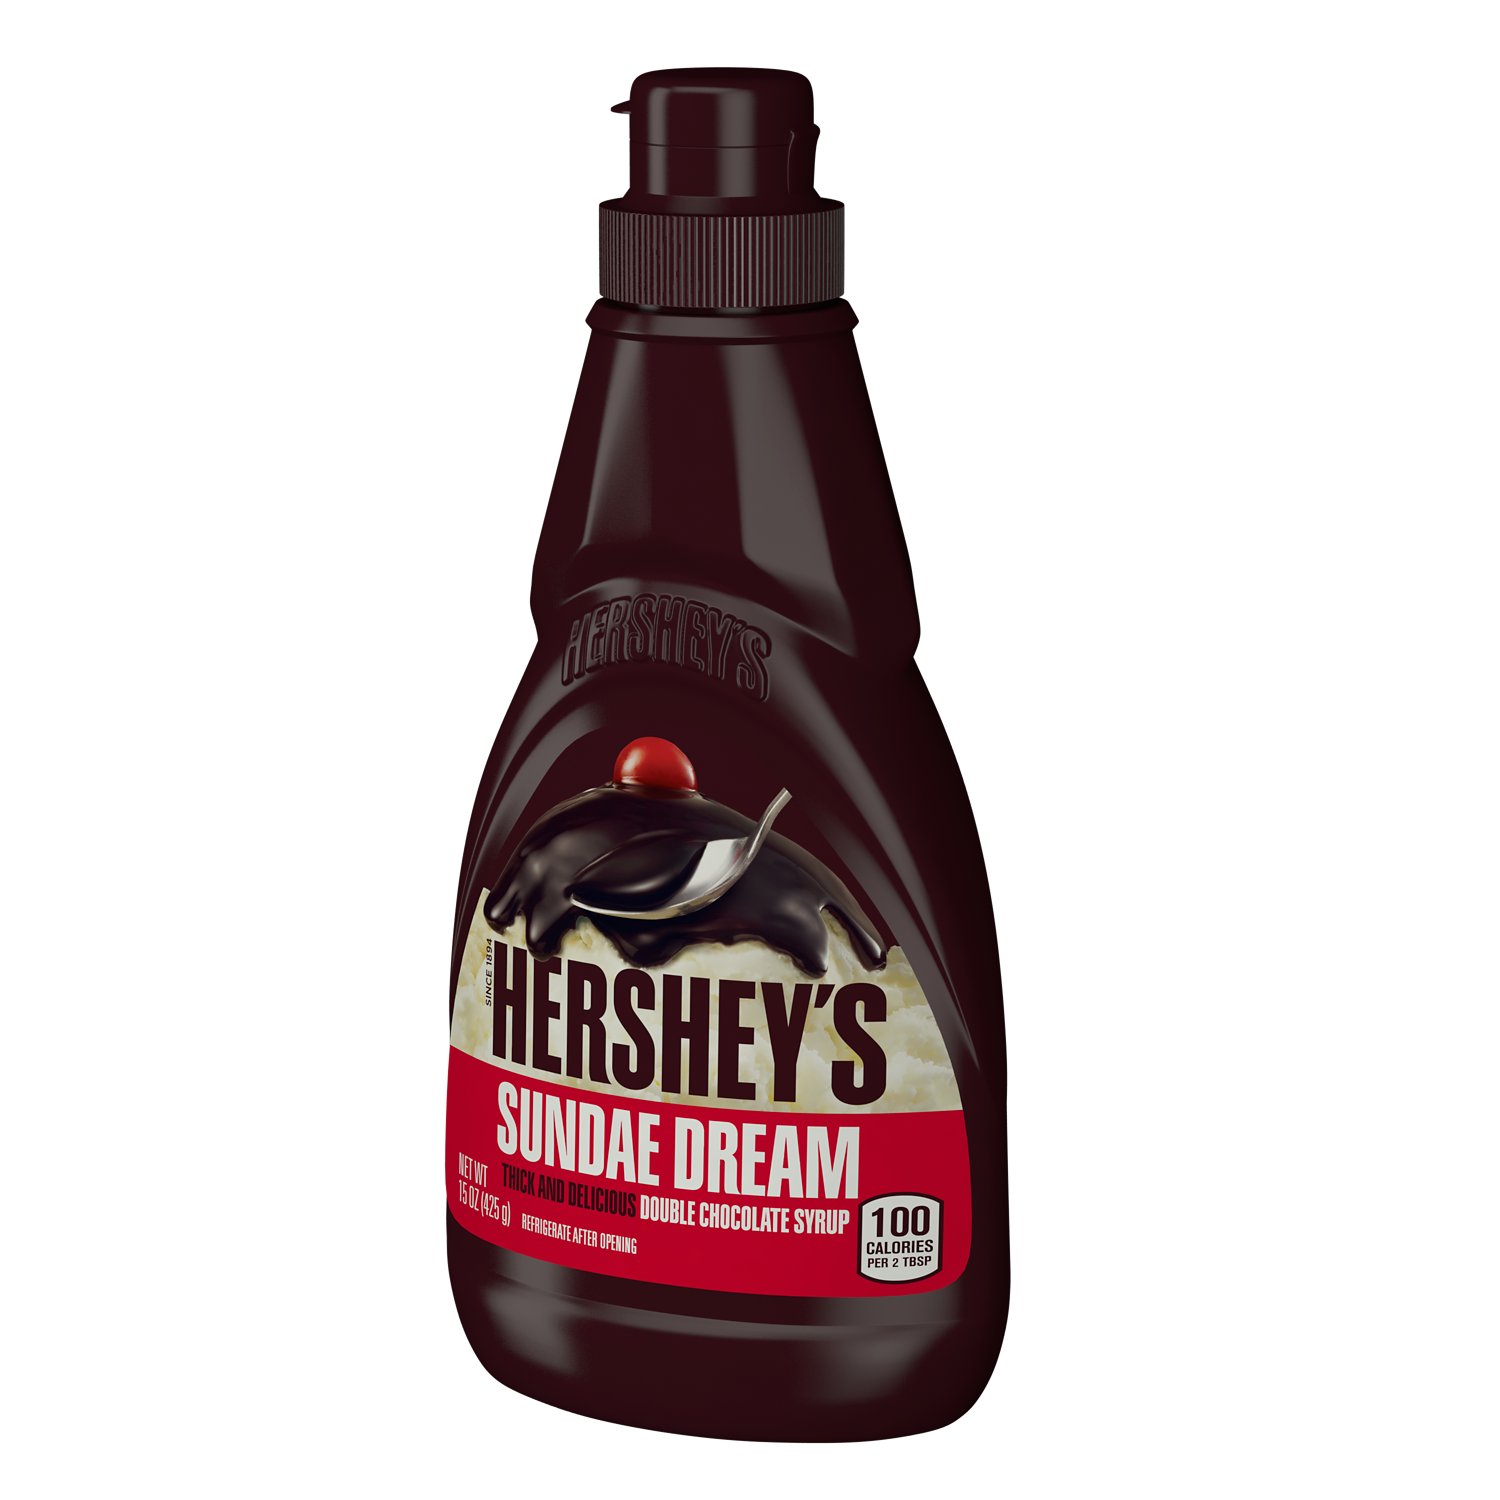 HERSHEY'S SUNDAE DREAM Double Chocolate Syrup, 15 oz bottle - Right Side of Package